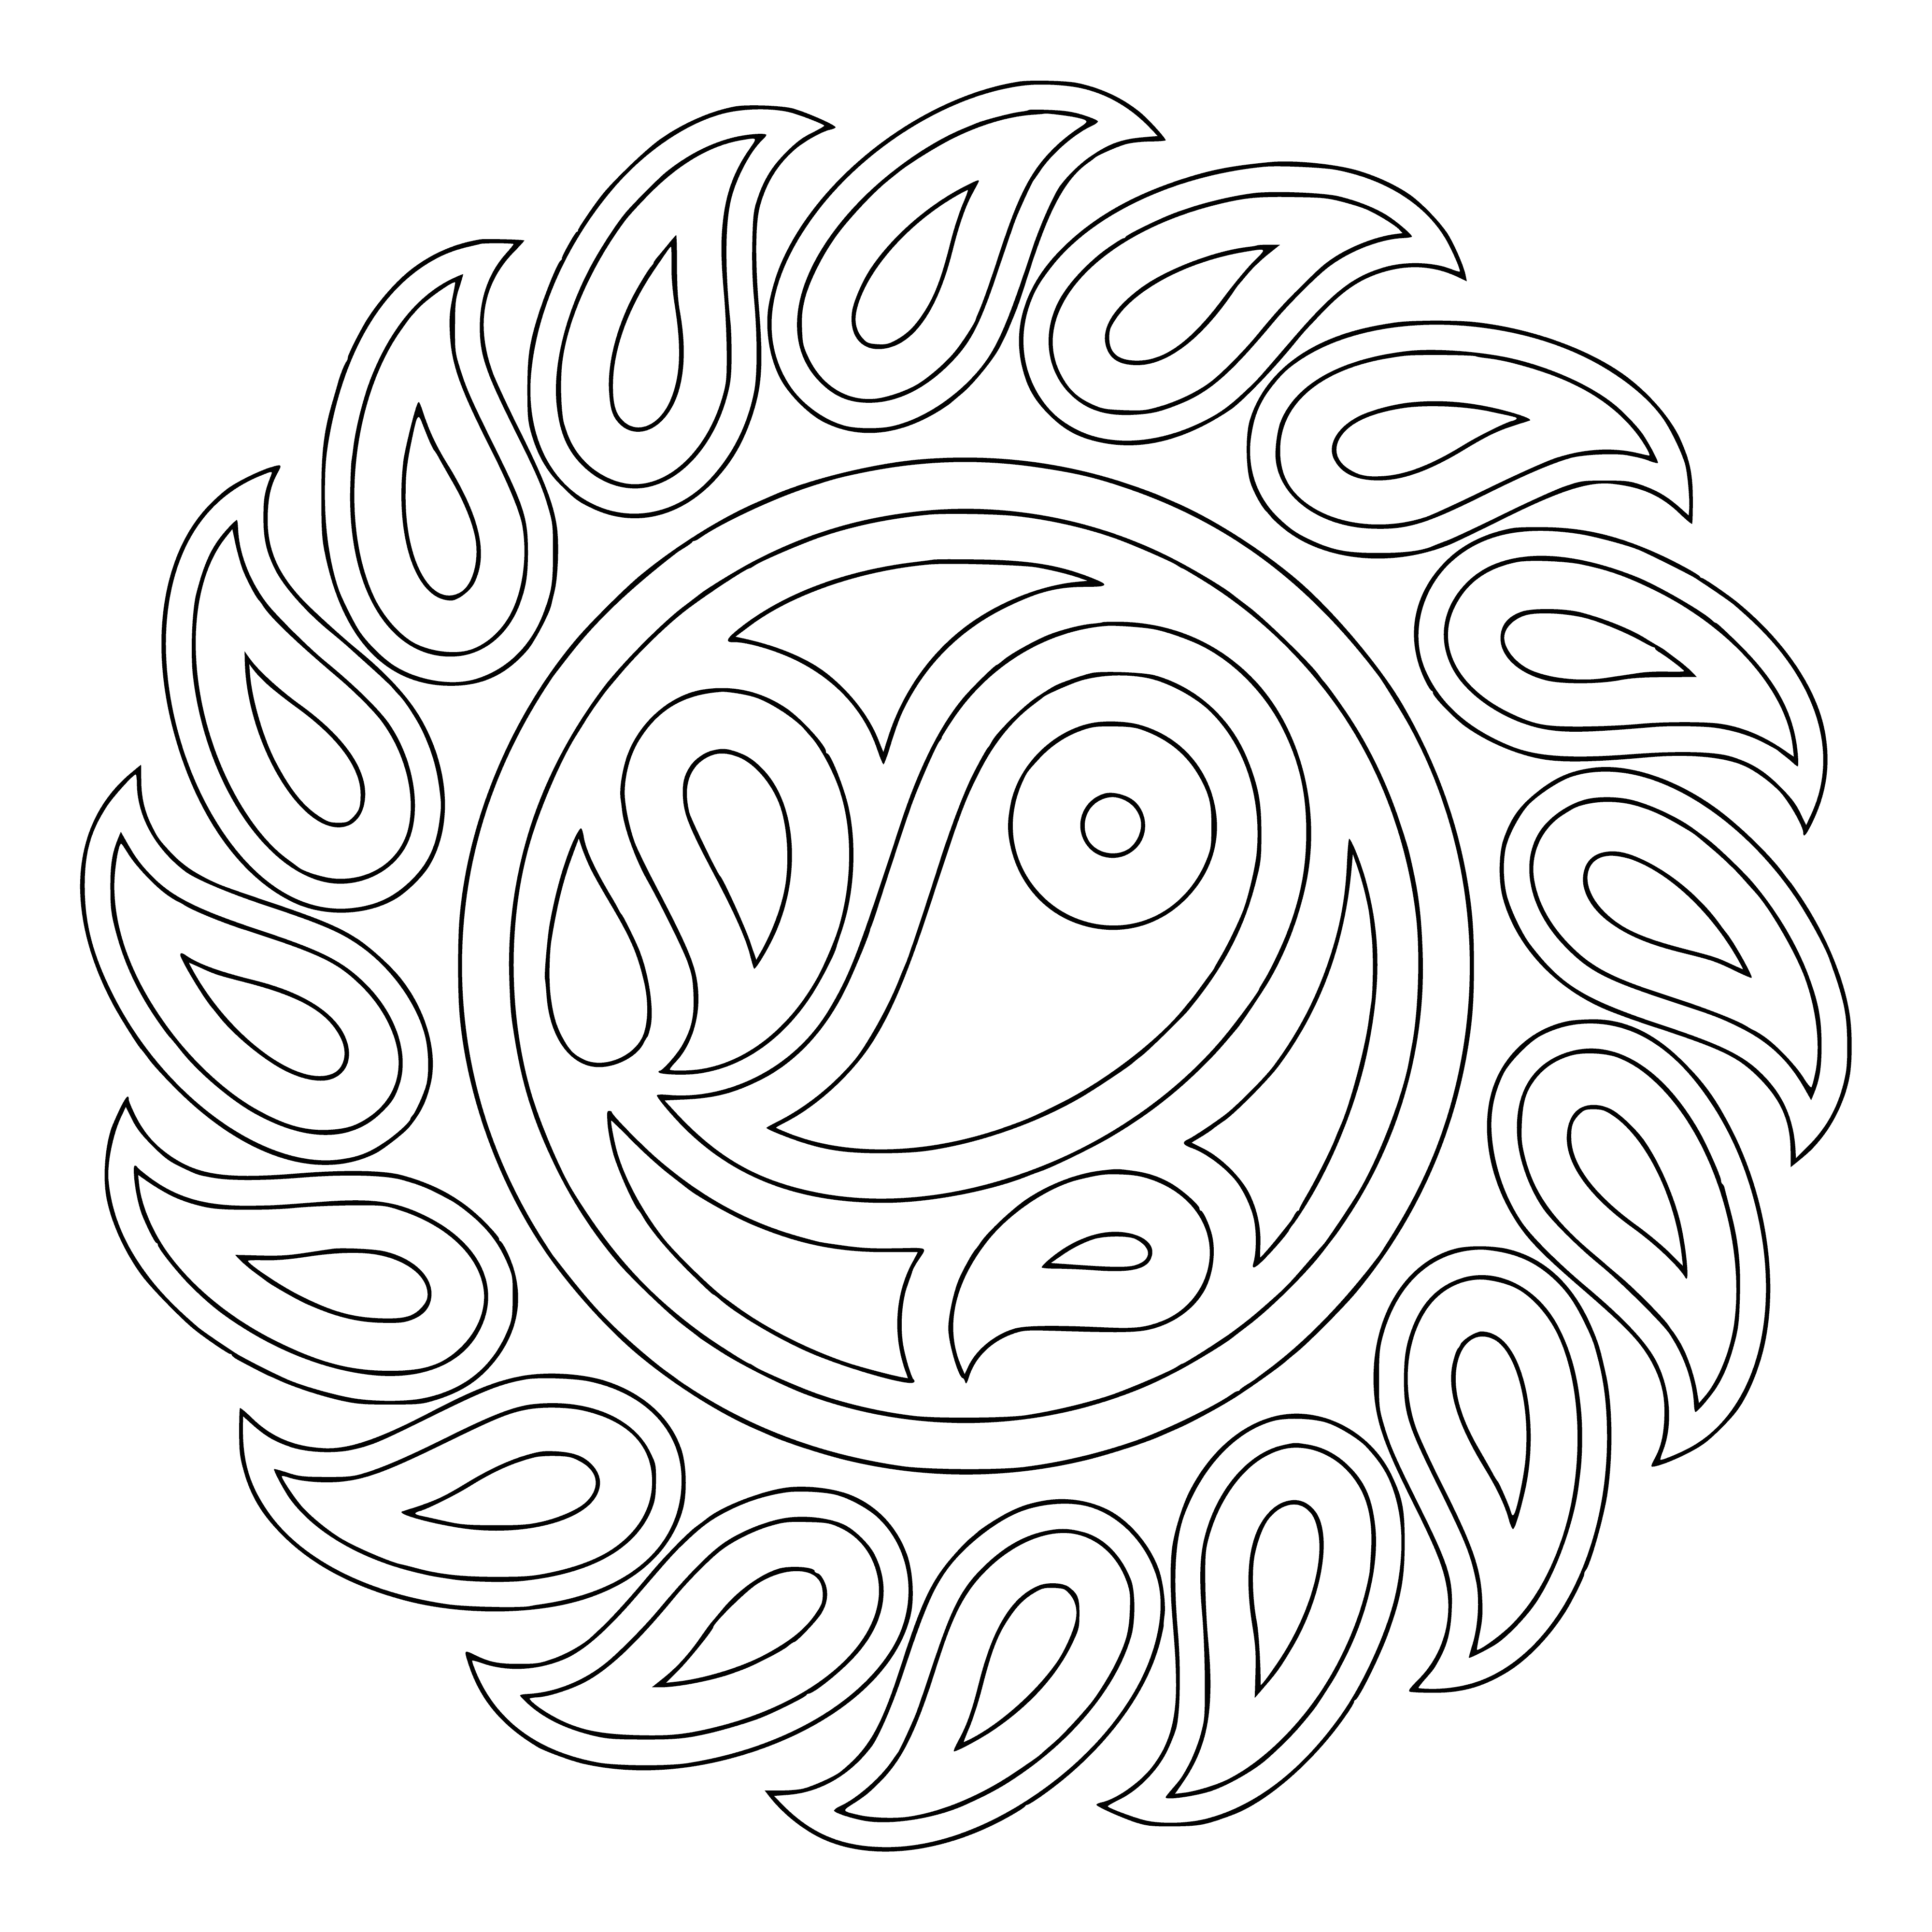 coloring page: A mandala is a circle with 3 concentric circles, surrounded by a square divided into 4 colored quadrants. In the center is a black dot. #meditation #yogapractice